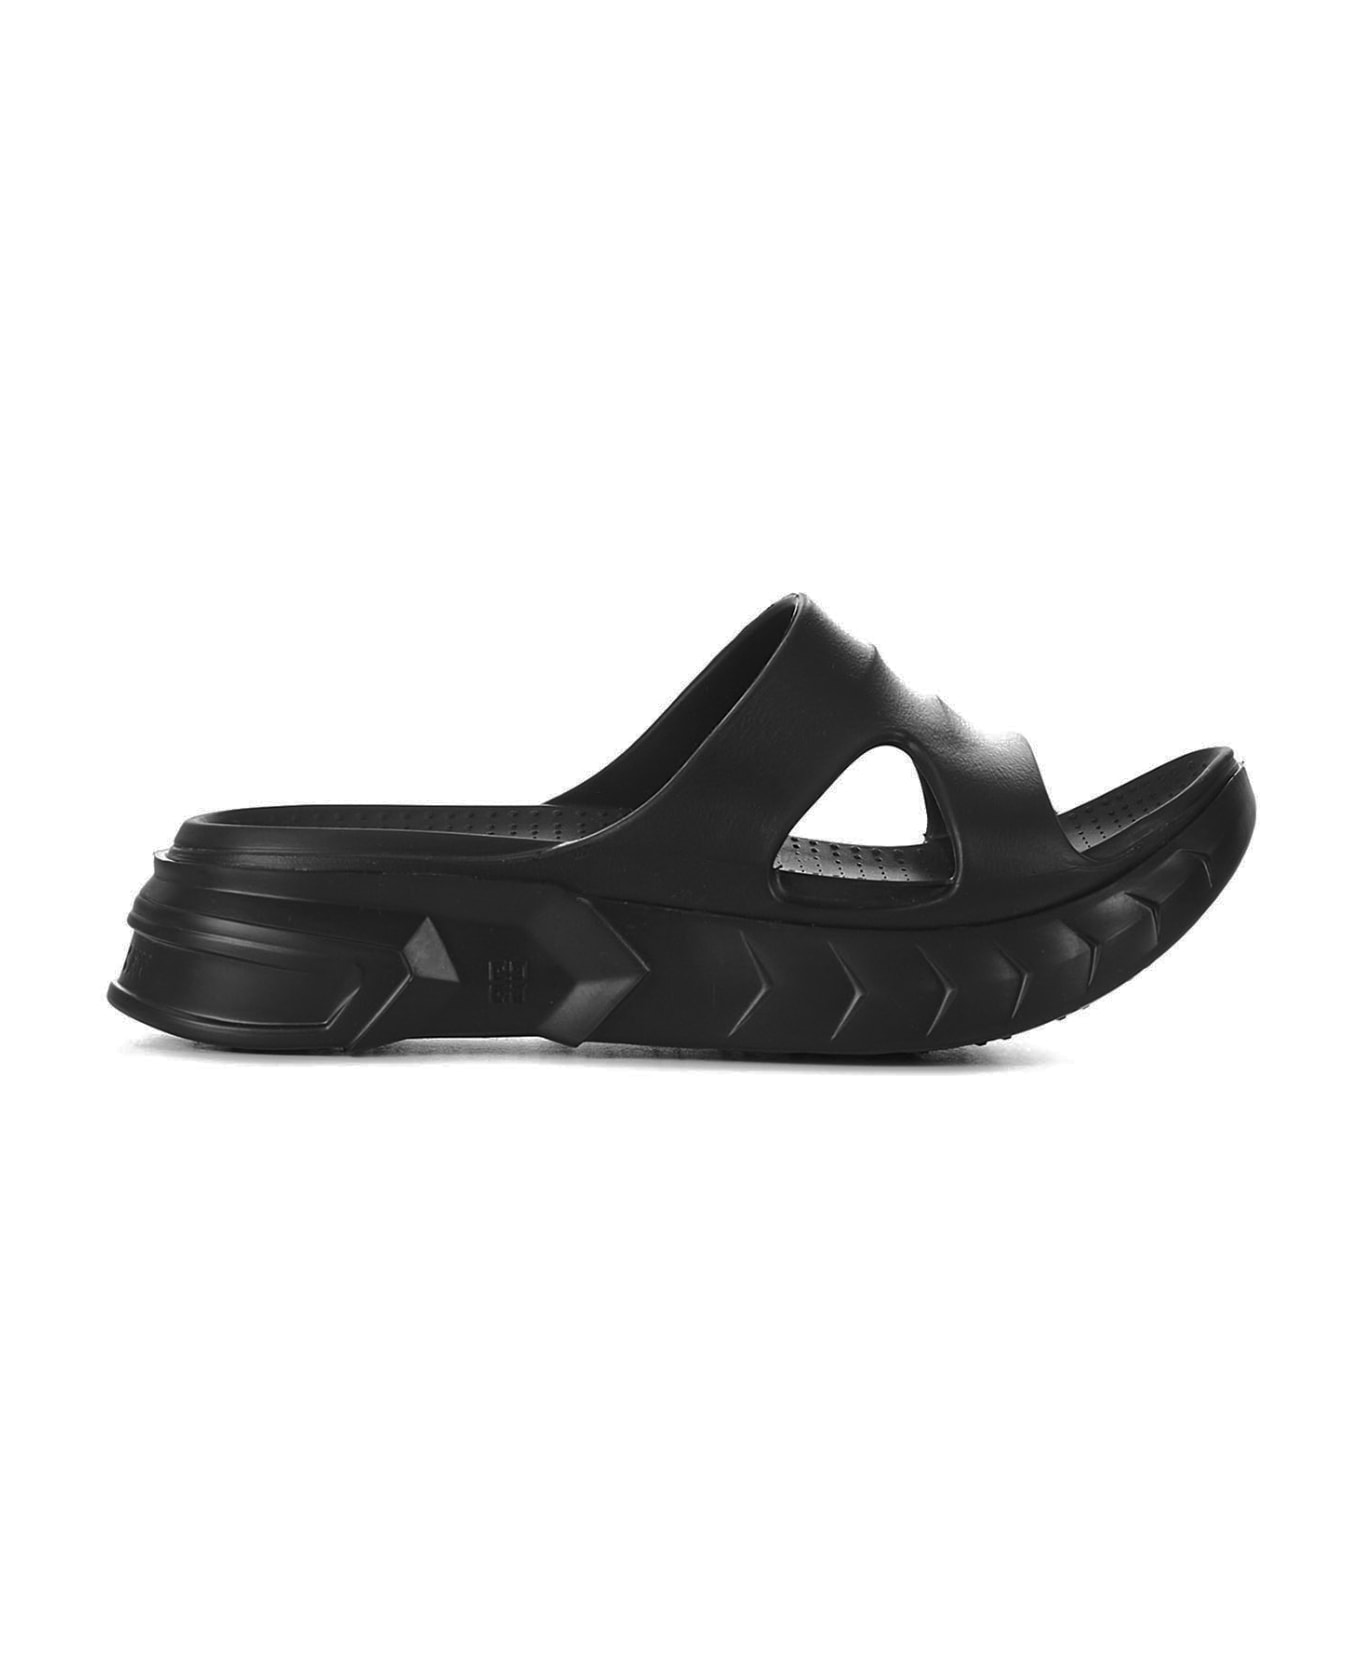 Givenchy Marshmallow Sandals - BLACK